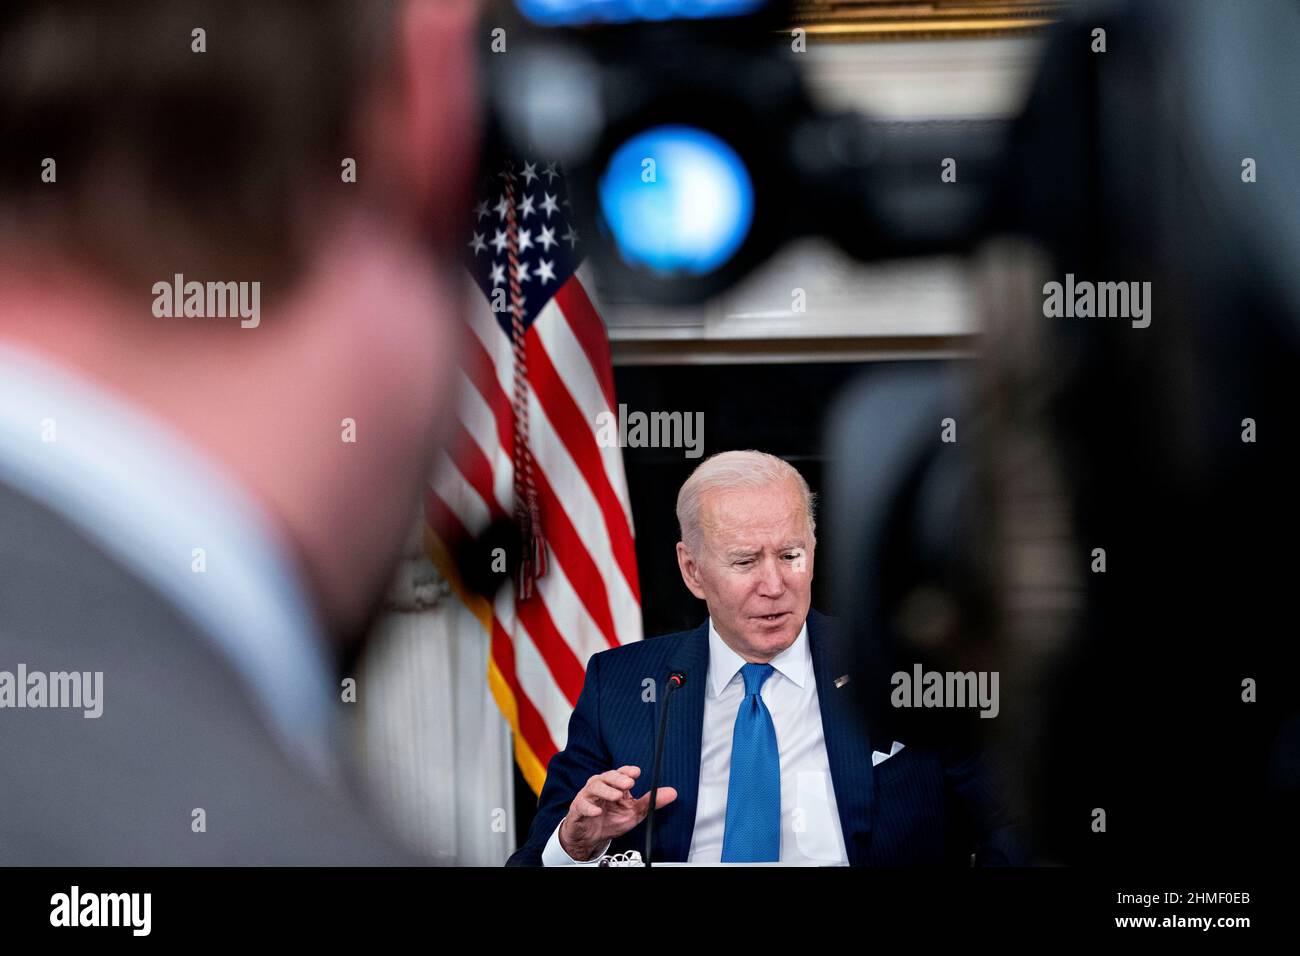 United States President Joe Biden speaks while meeting with chief executive officers of electric utilities in the State Dining Room of the White House in Washington, DC, U.S., on Wednesday, Feb. 9, 2022. Biden is meeting with the leaders of some of the nation's largest utilities as the White House mounts a renewed push to get its climate-spending laden reconciliation package back on track. Credit: Andrew Harrer/Pool via CNP /MediaPunch Stock Photo